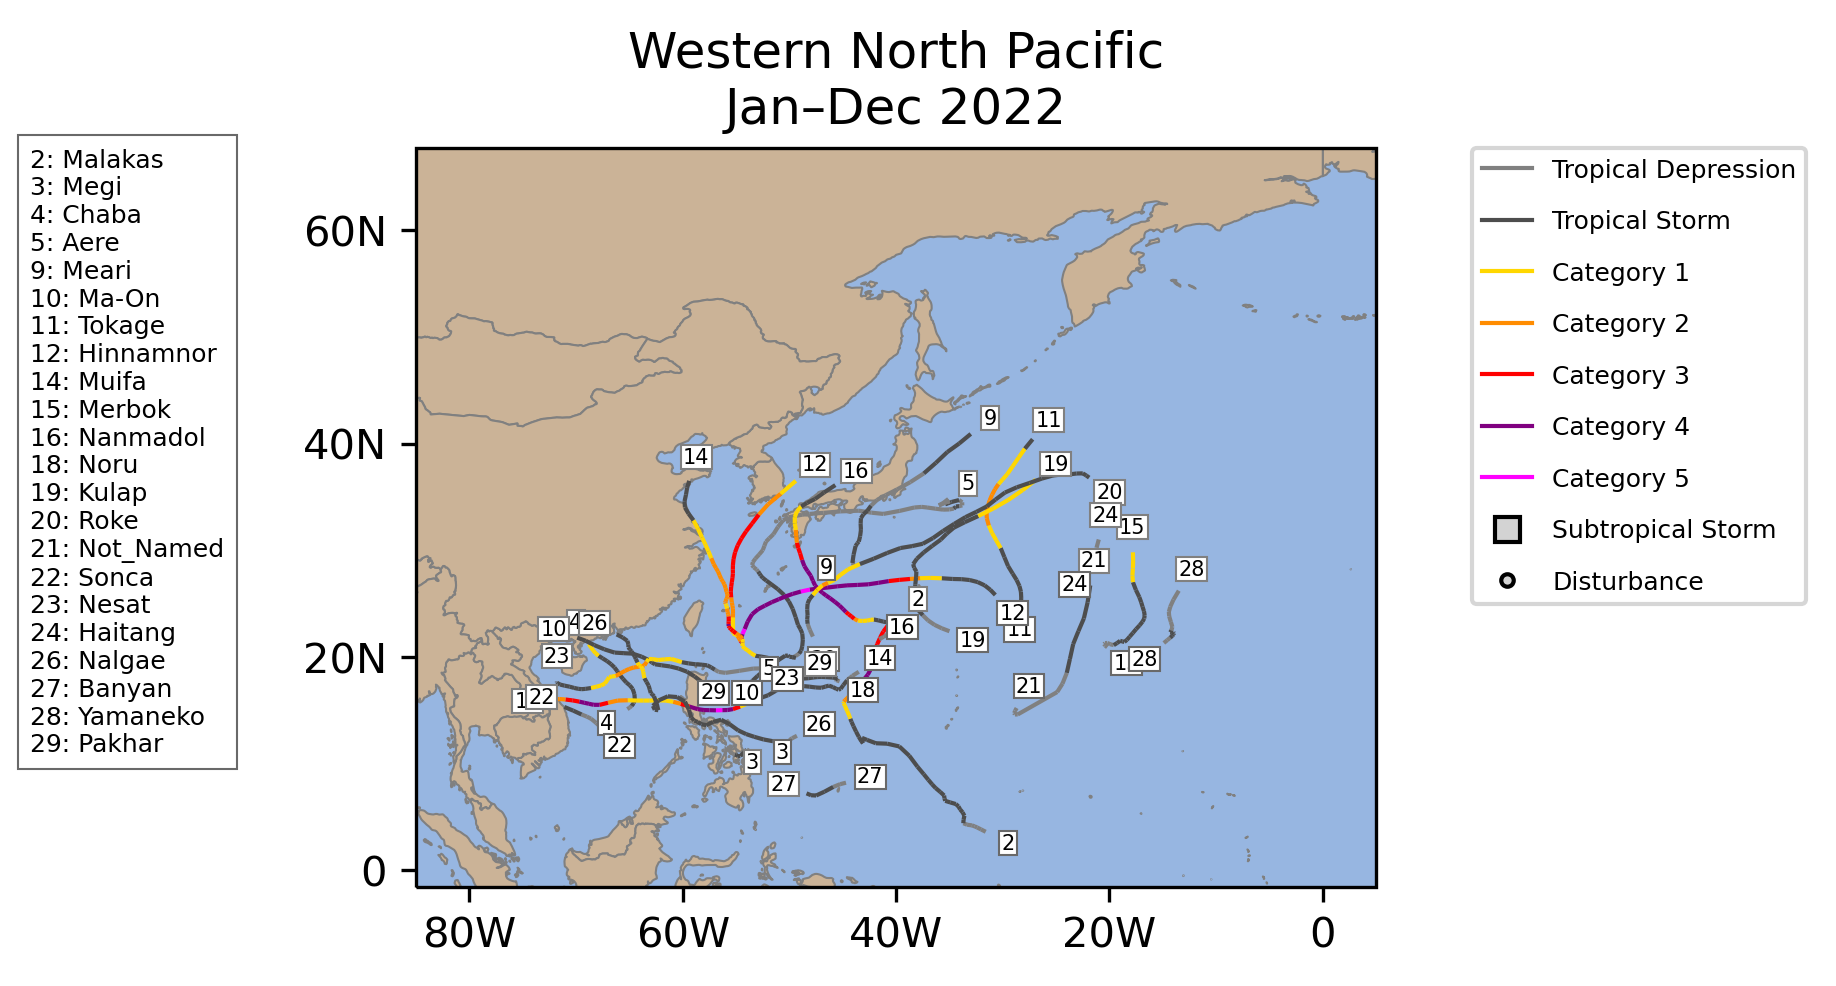 West Pacific Tropical Cyclone Storm Tracks January-December 2022